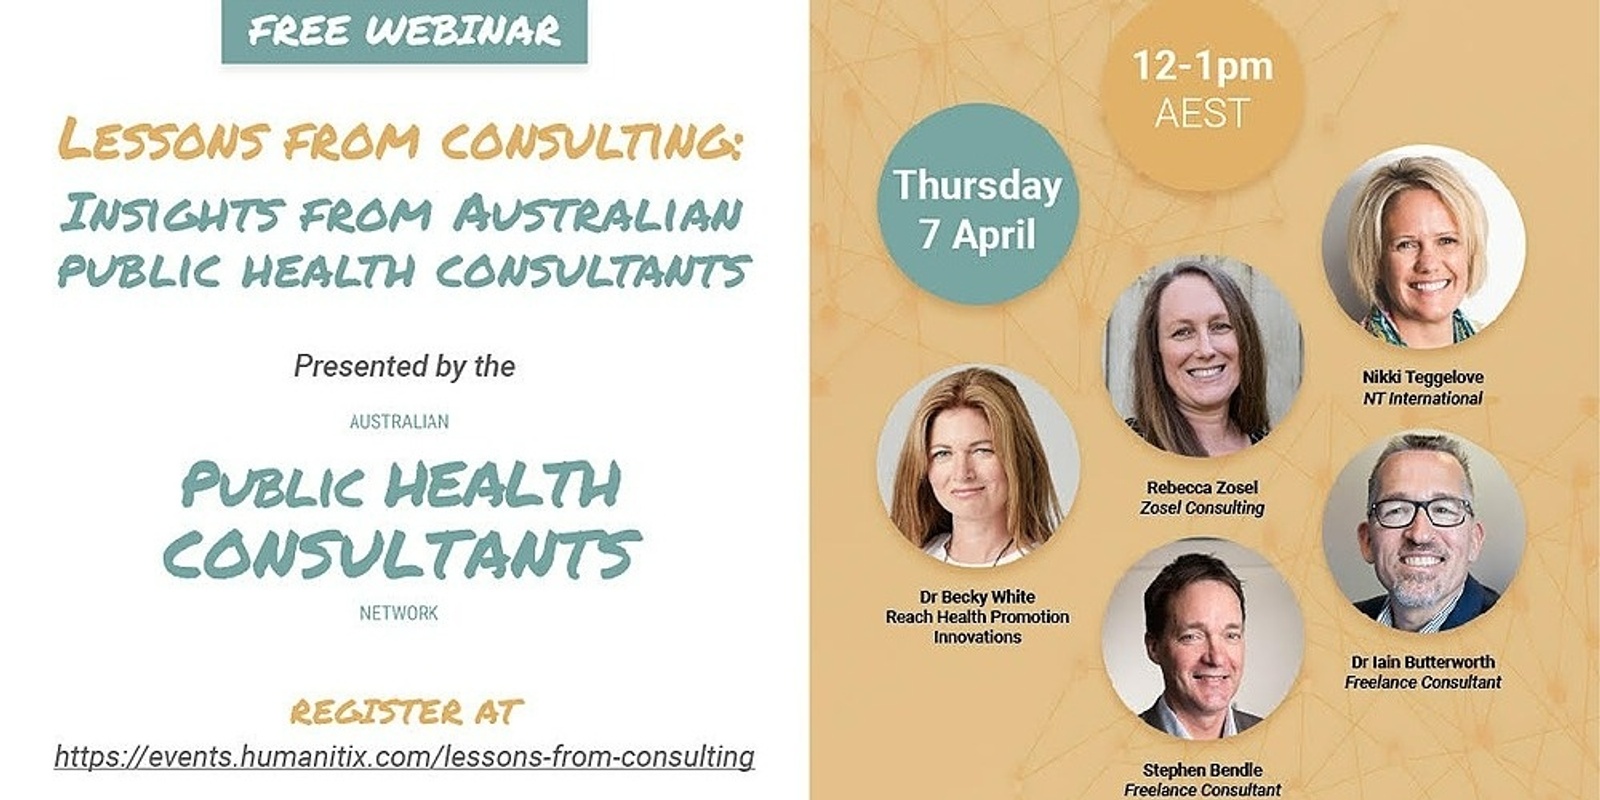 Banner image for Lessons from consulting: Insights from Australian public health consultants